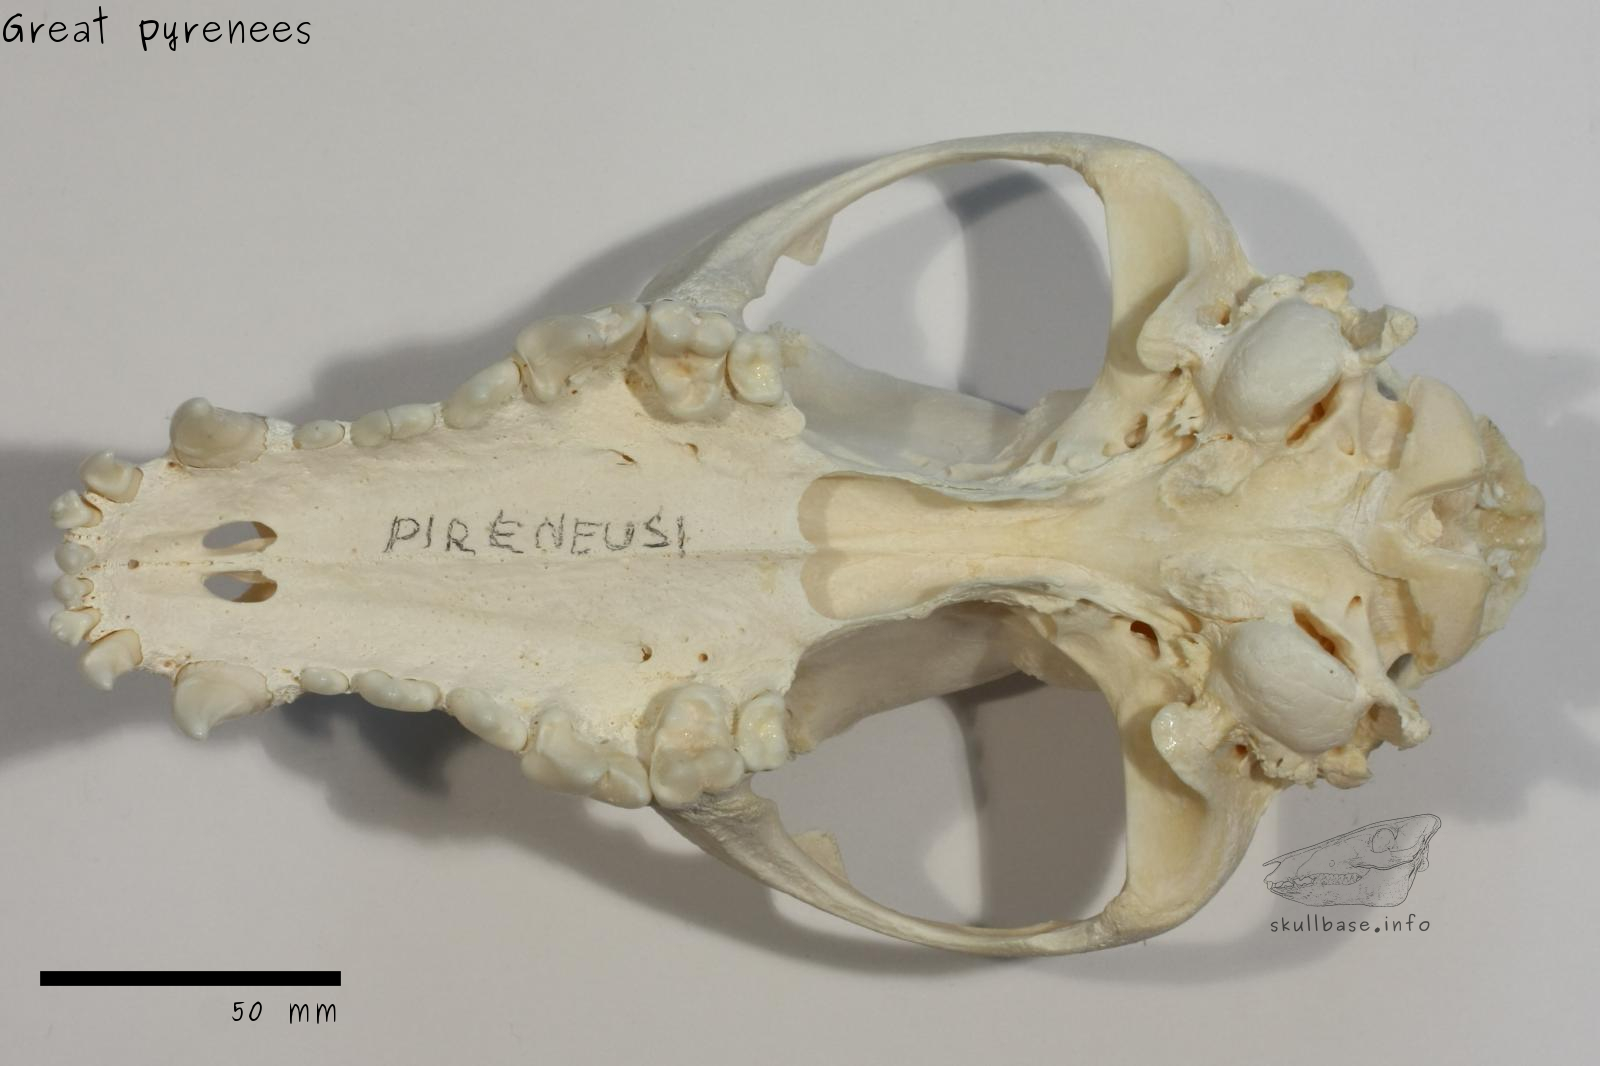 Great pyrenees (Canis lupus familiaris) skull ventral view